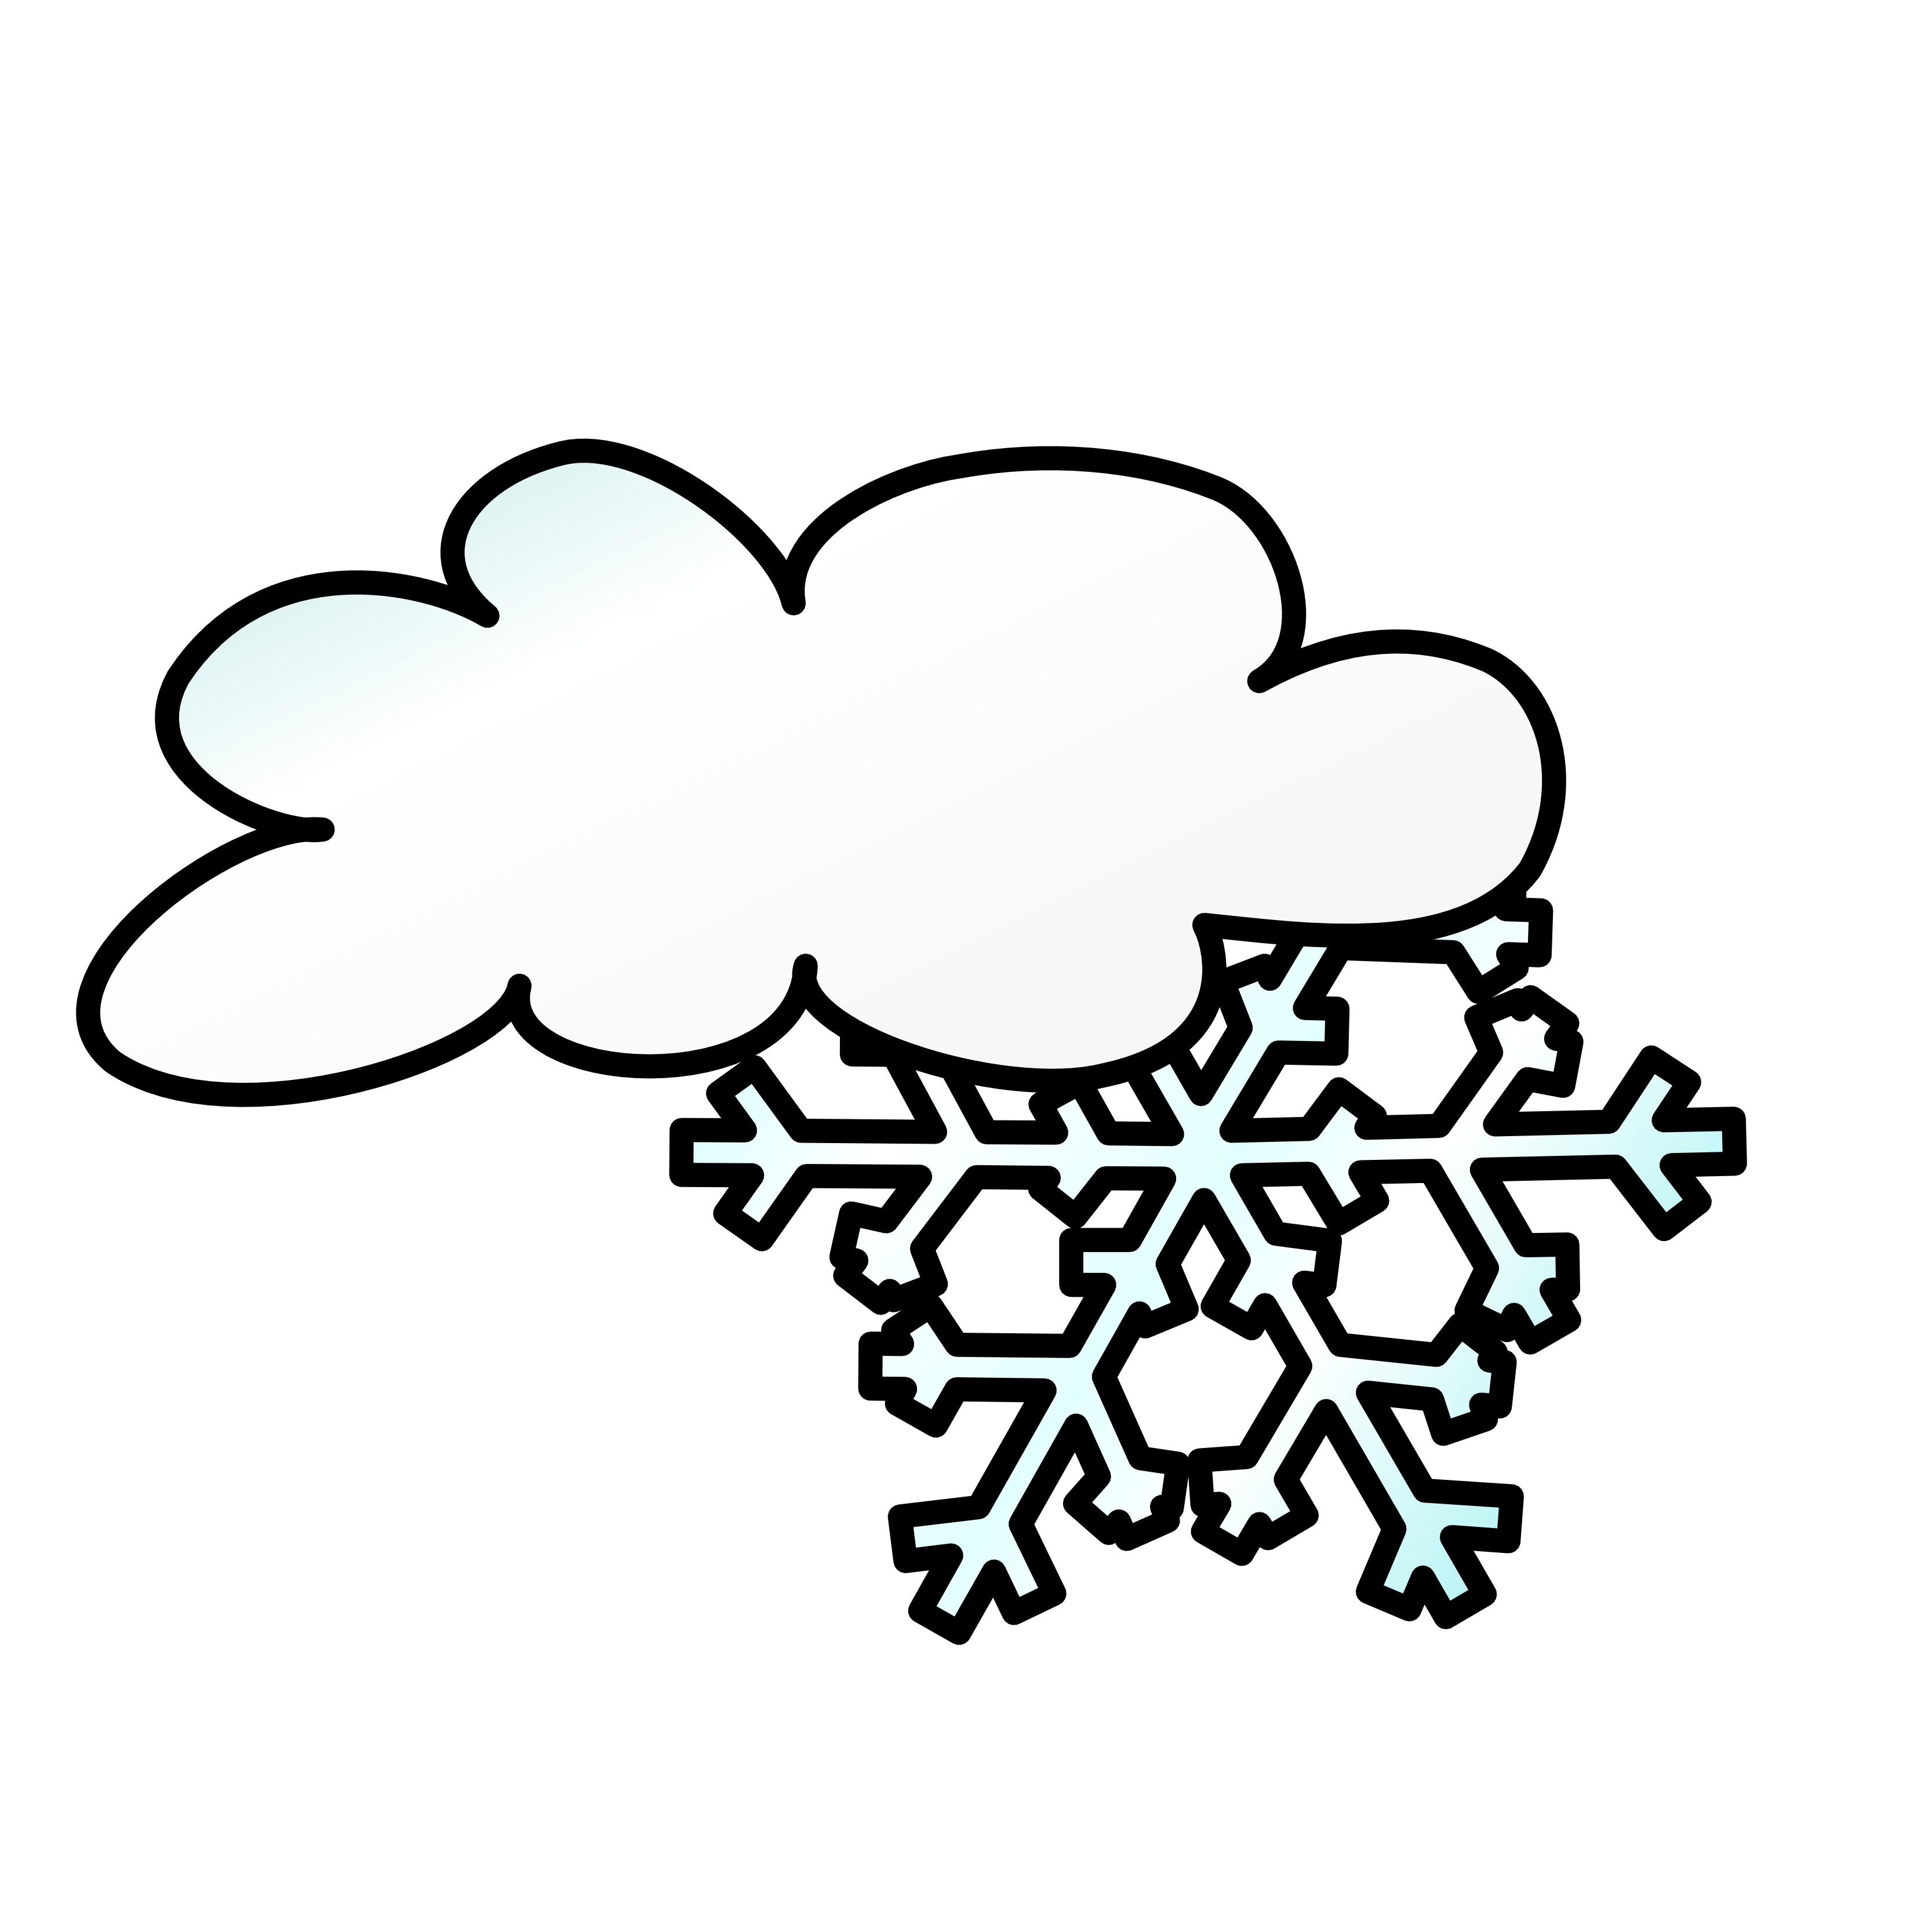 Weather clip art free. Wet clipart cold